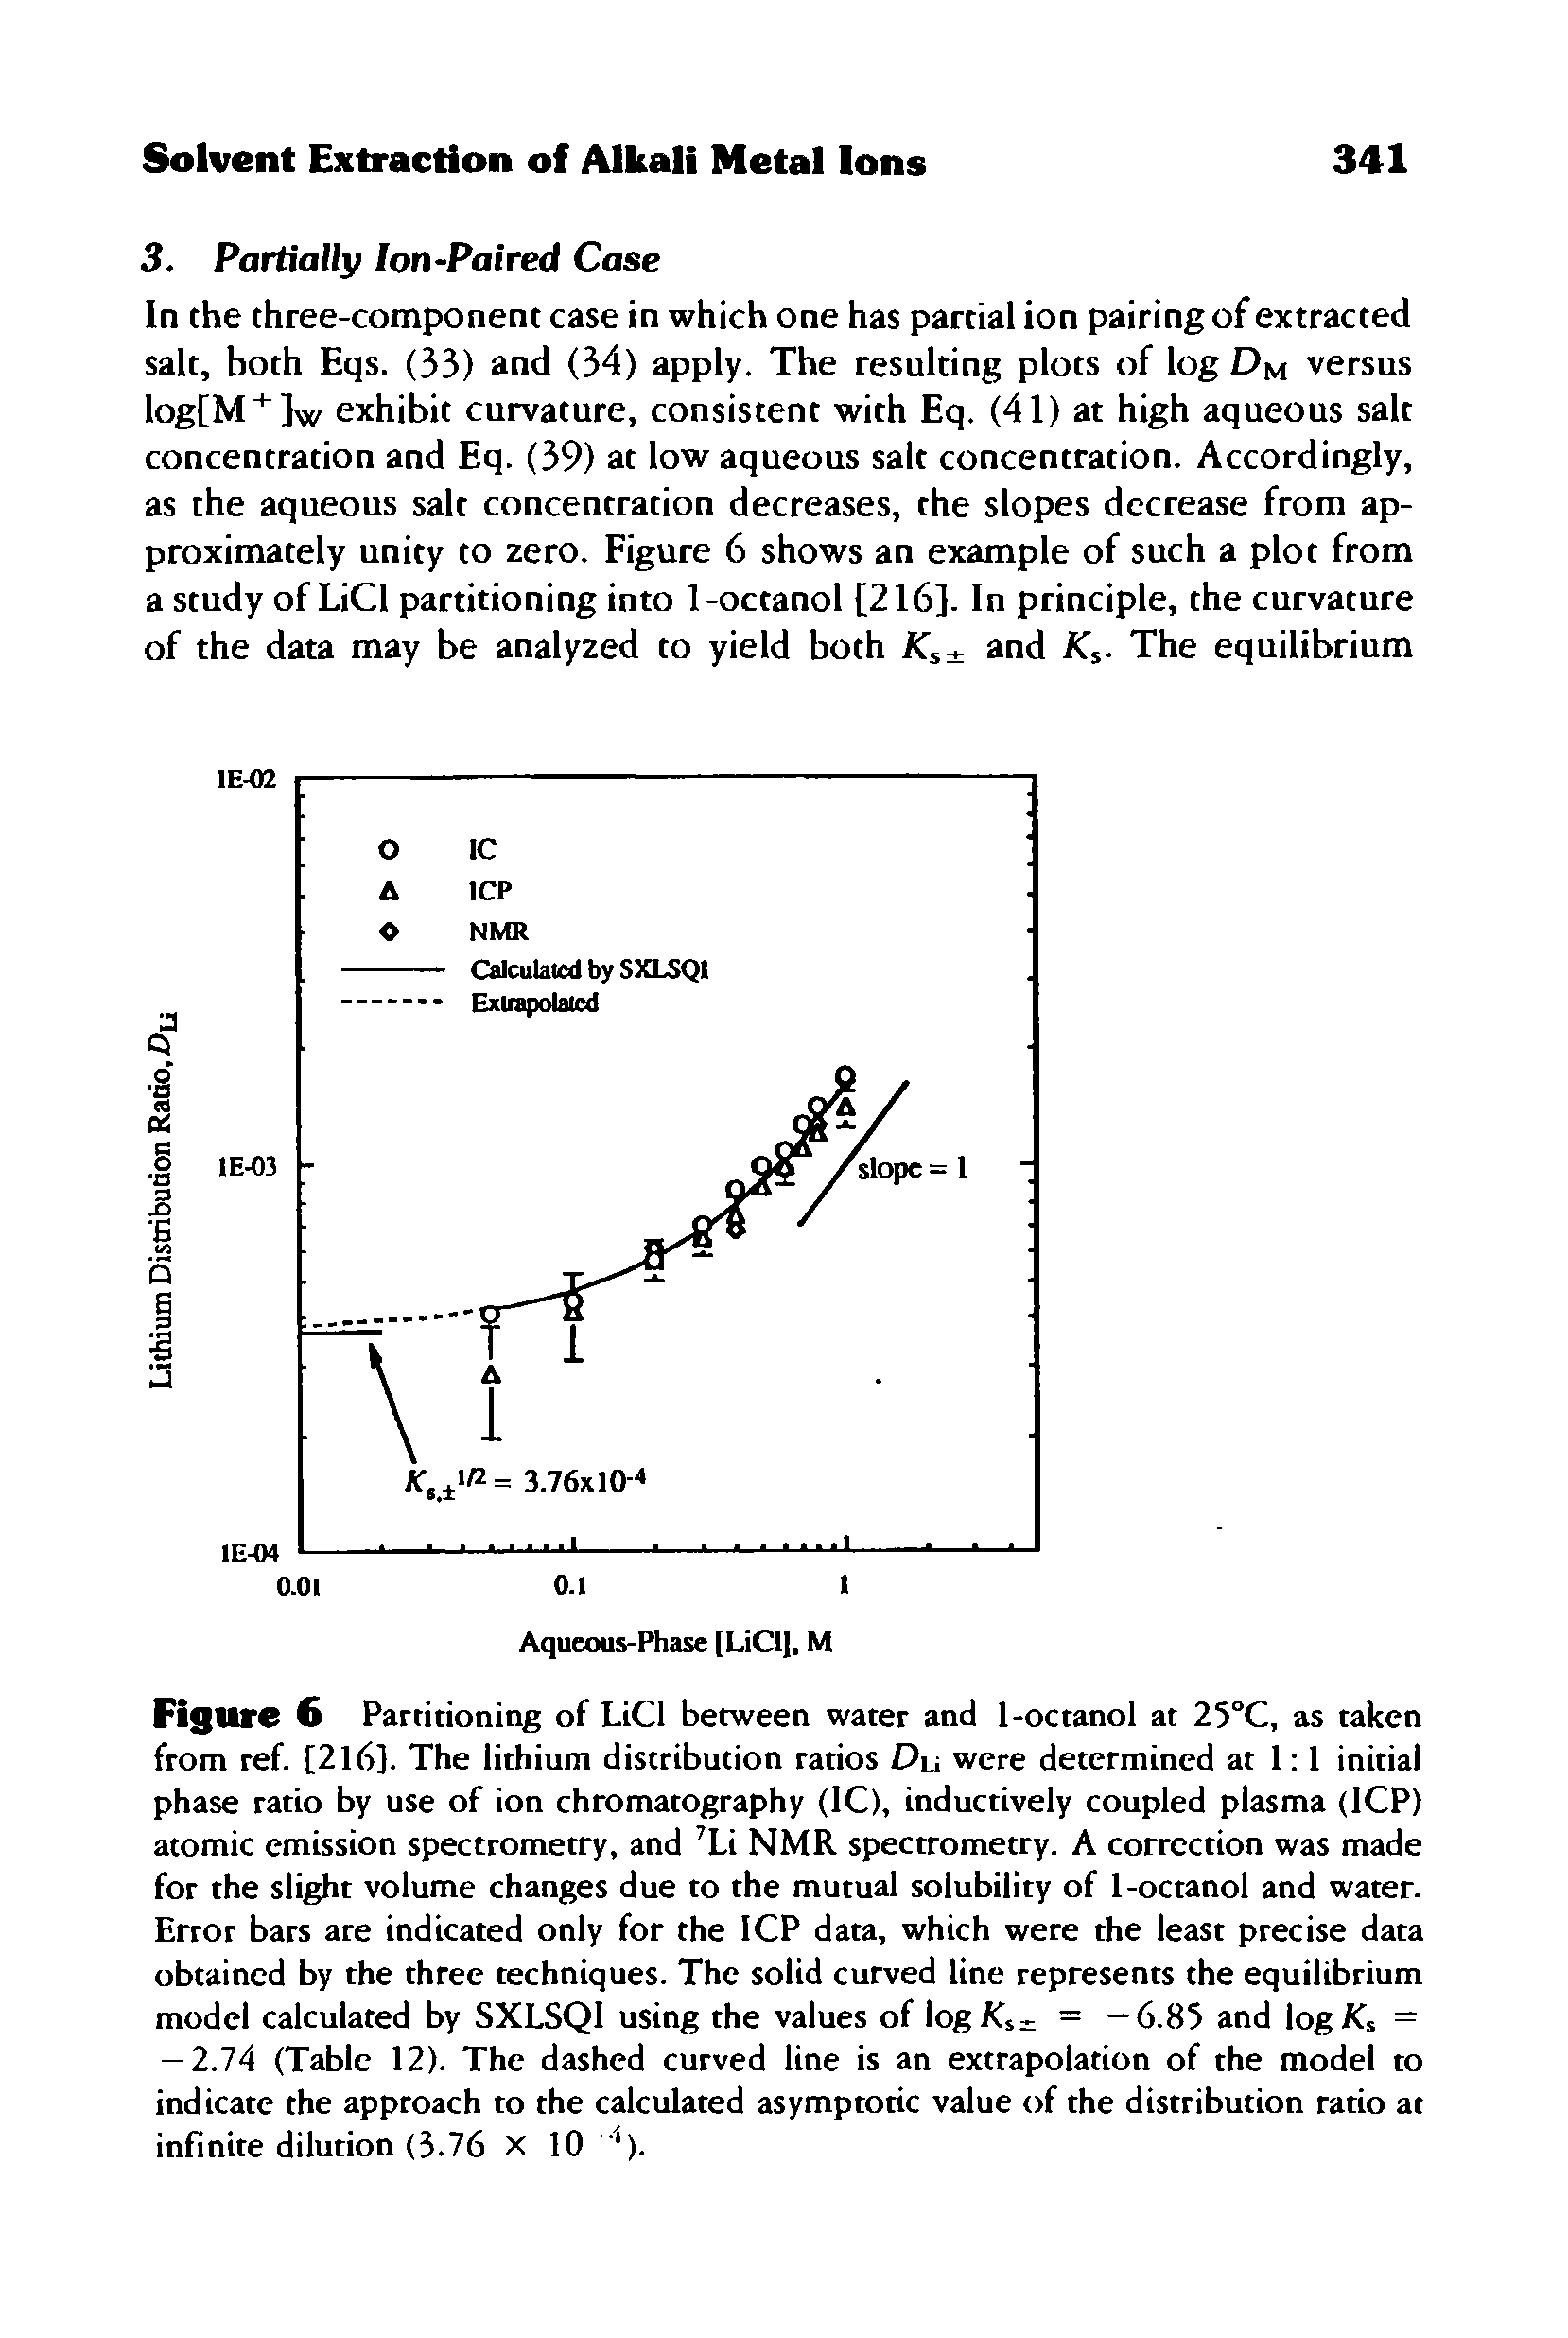 Figure 6 Partitioning of LiCl between water and 1-octanol at 25°C, as taken from ref. [2l6]. The lithium distribution ratios Du were determined at 1 1 initial phase ratio by use of ion chromatography (IC), inductively coupled plasma (ICP) atomic emission spectrometry, and Li NMR spectrometry. A correction was made for the slight volume changes due to the mutual solubility of 1-octanol and water. Error bars are indicated only for the ICP data, which were the least precise data obtained by the three techniques. The solid curved line represents the equilibrium model calculated by SXLSQl using the values of log/Cs= = —6.85 and logX, = — 2.74 (Table 12). The dashed curved line is an extrapolation of the model to indicate the approach to the calculated asymptotic value of the distribution ratio at infinite dilution (3.76 X 10...